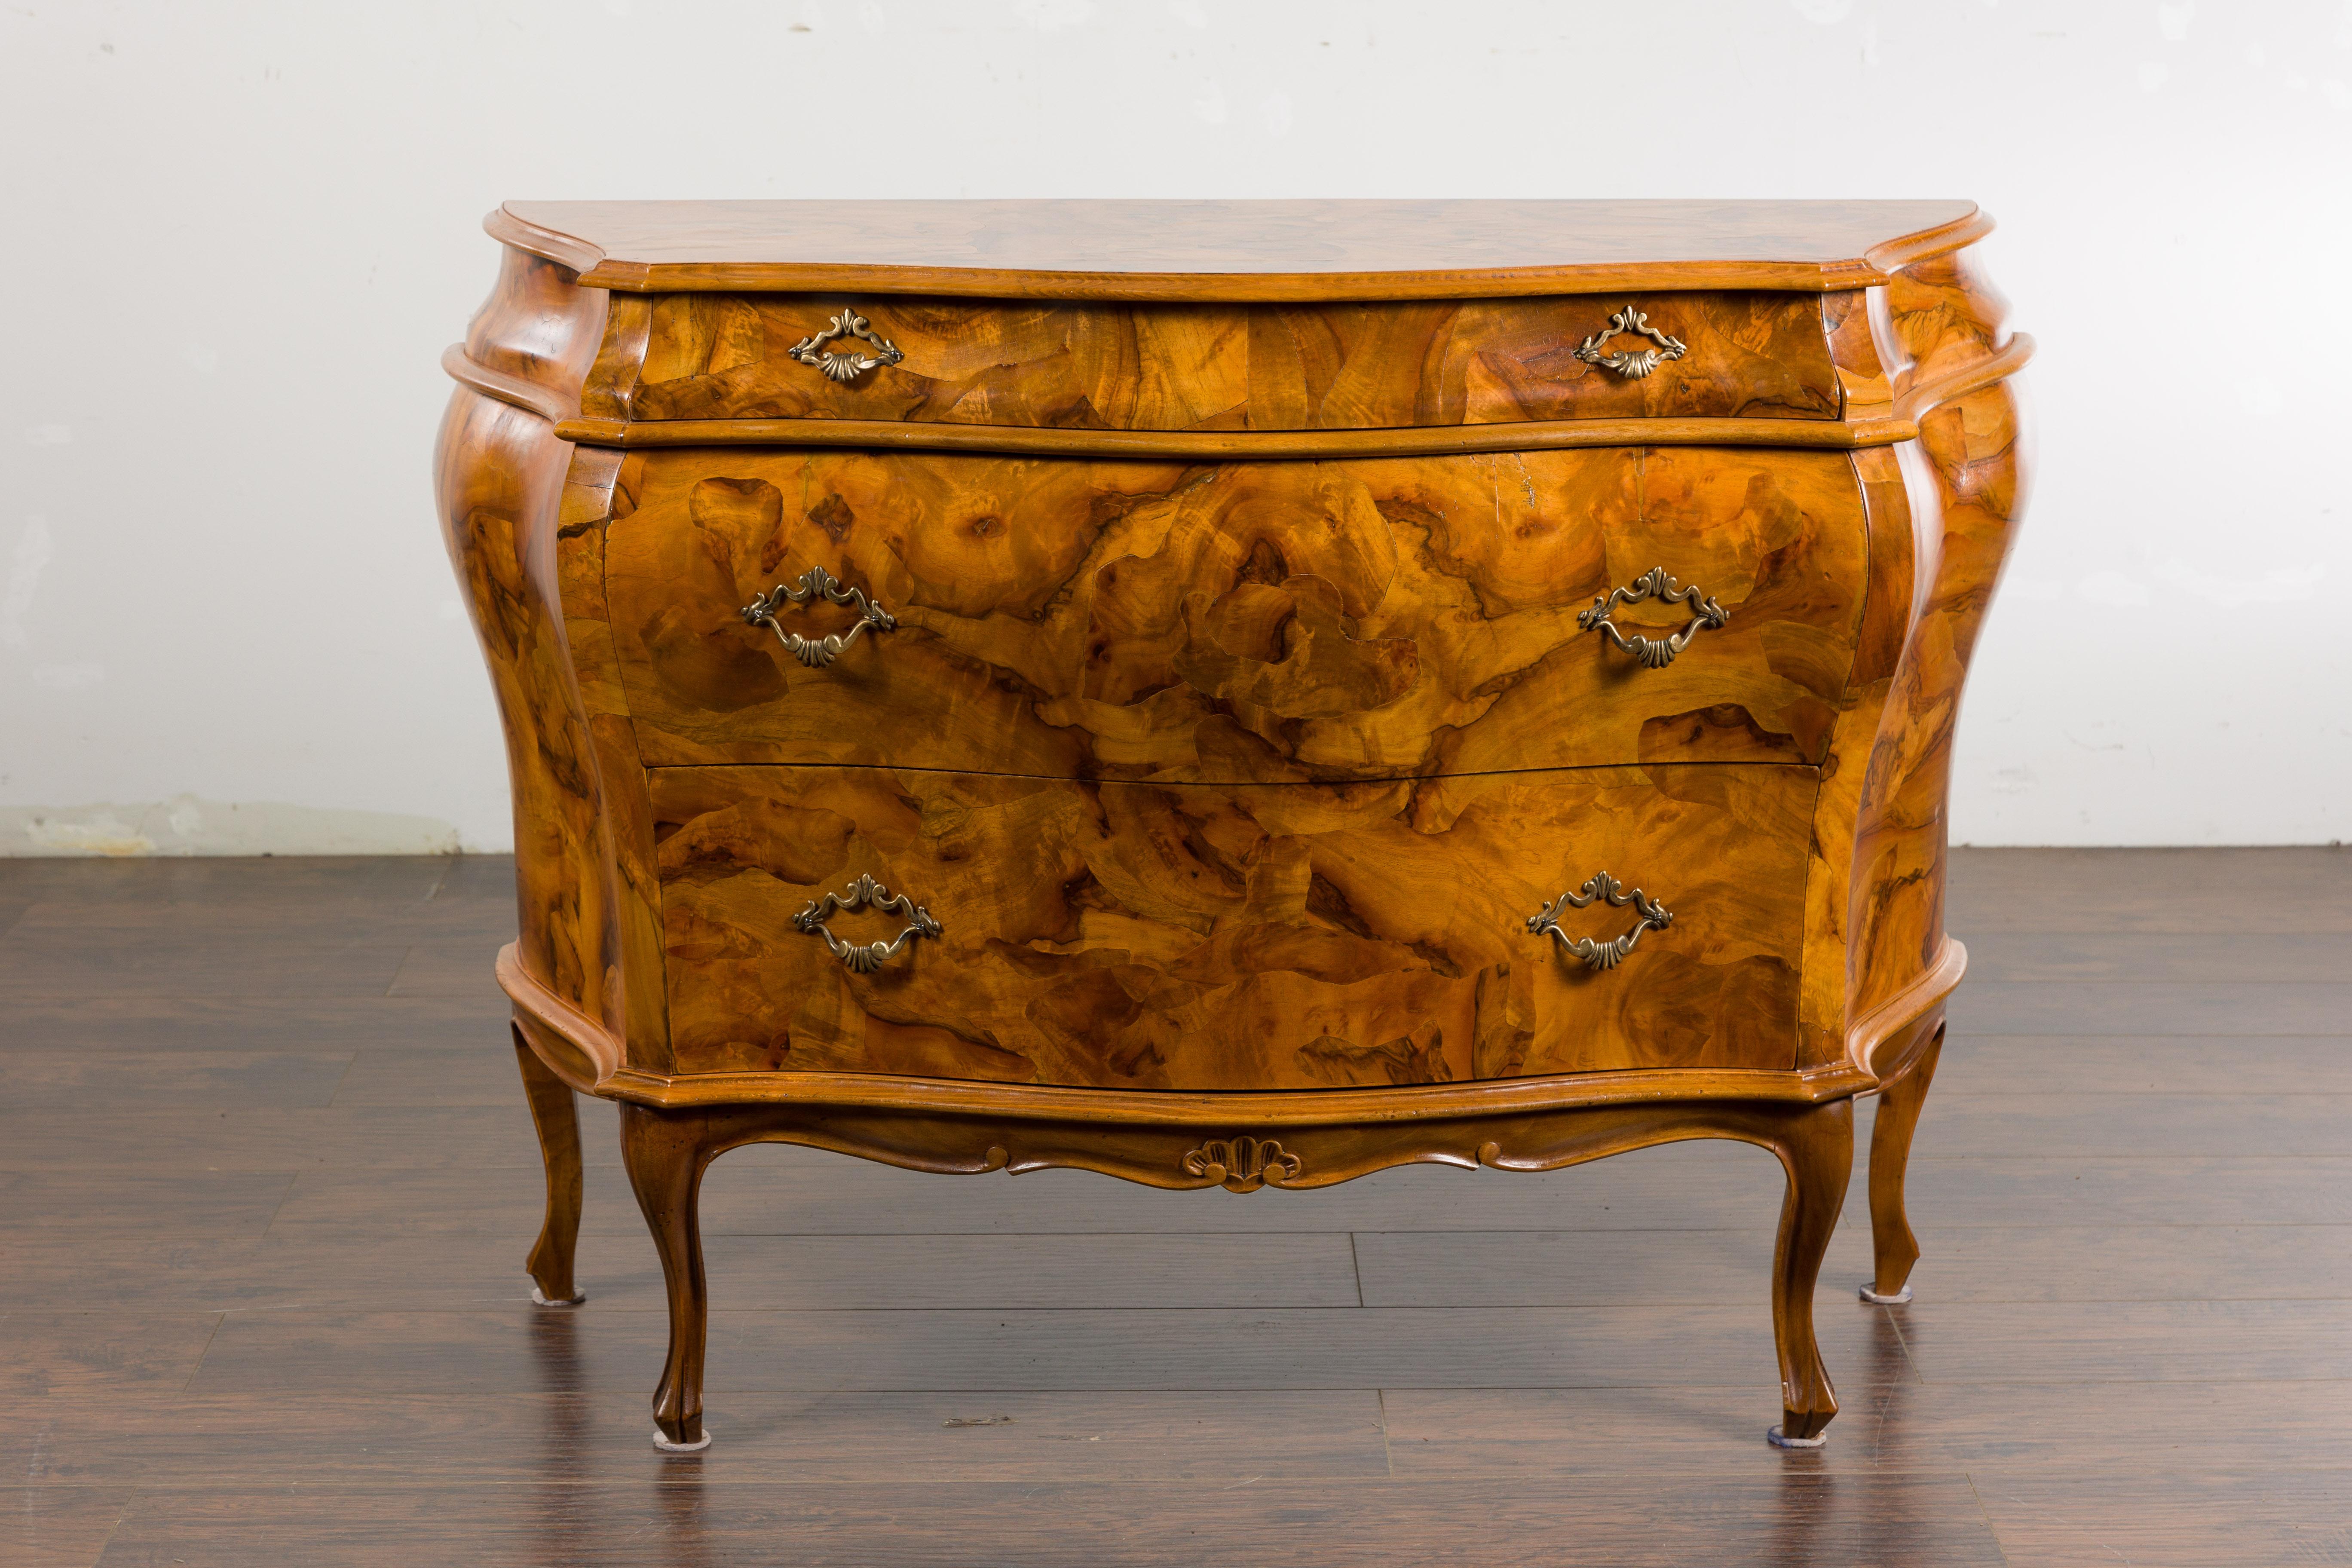 An Italian Rococo style walnut veneered bombé crossbow chest from the mid 20th century with serpentine front, three drawers, cabriole legs and exquisite veneer. Add a touch of elegance to your living space with this exquisite Italian Rococo style